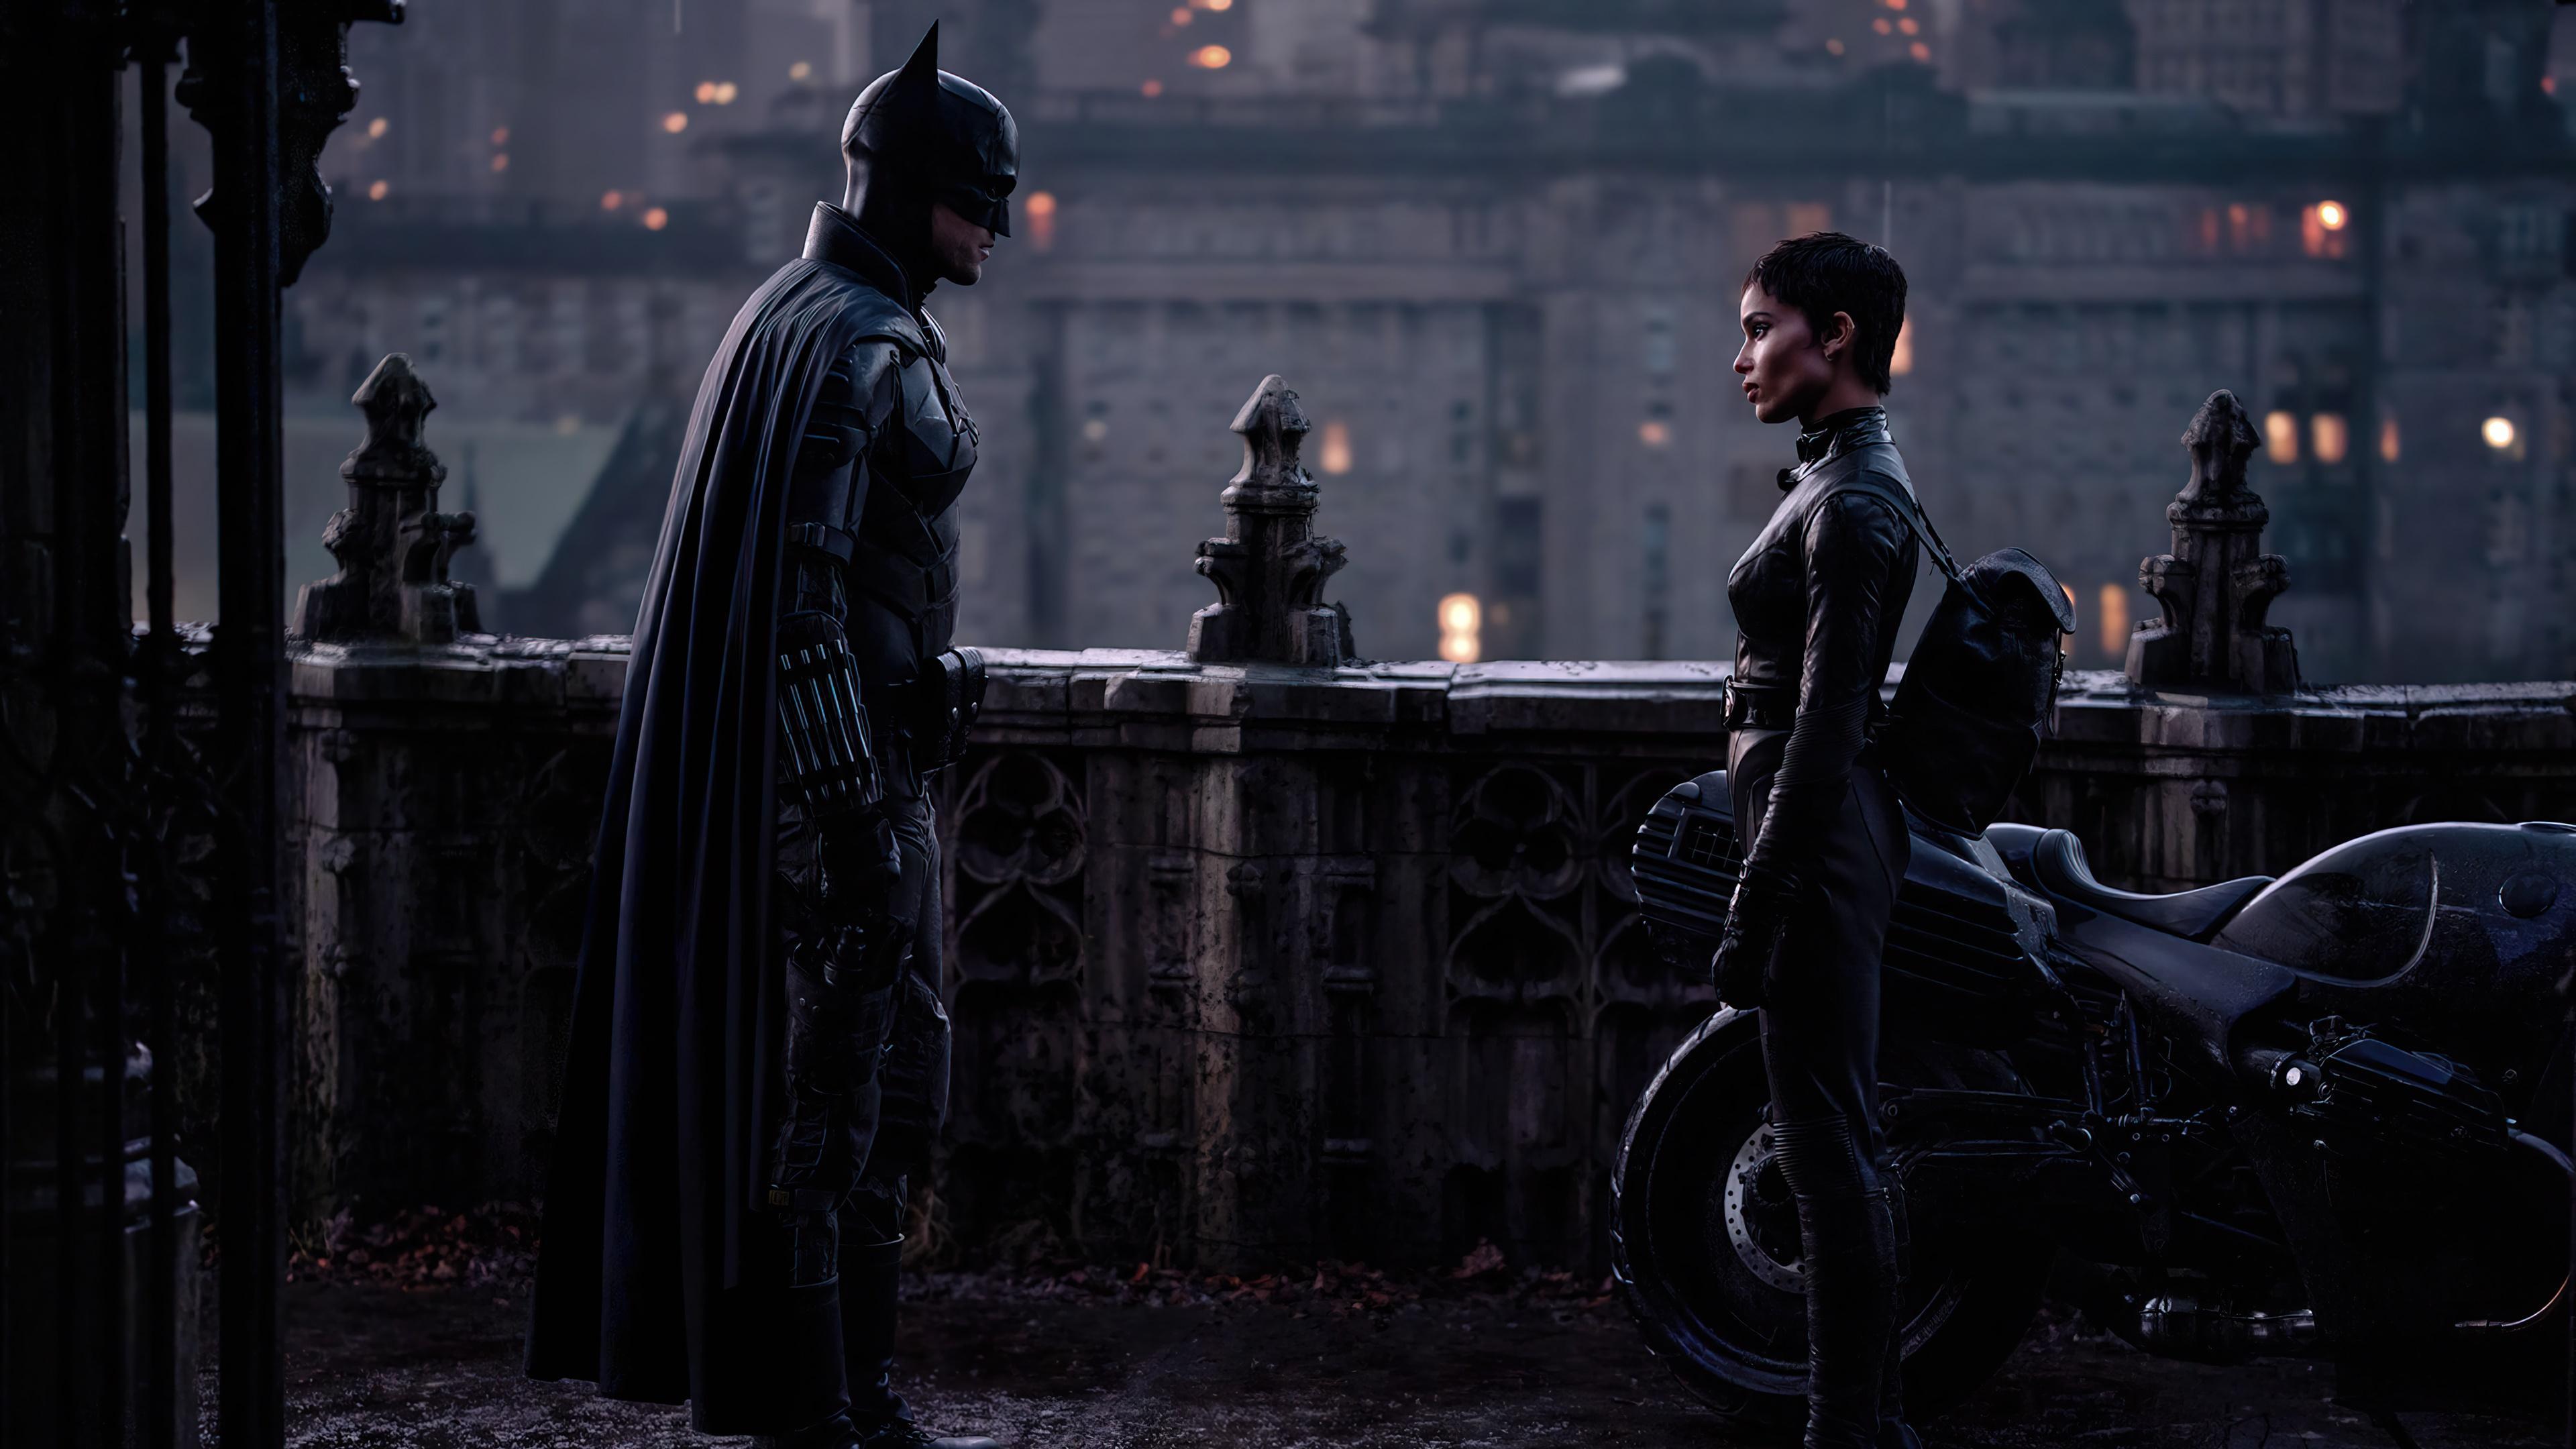 HD wallpaper, The Batman, 2022, 4K, And Catwoman, Movie